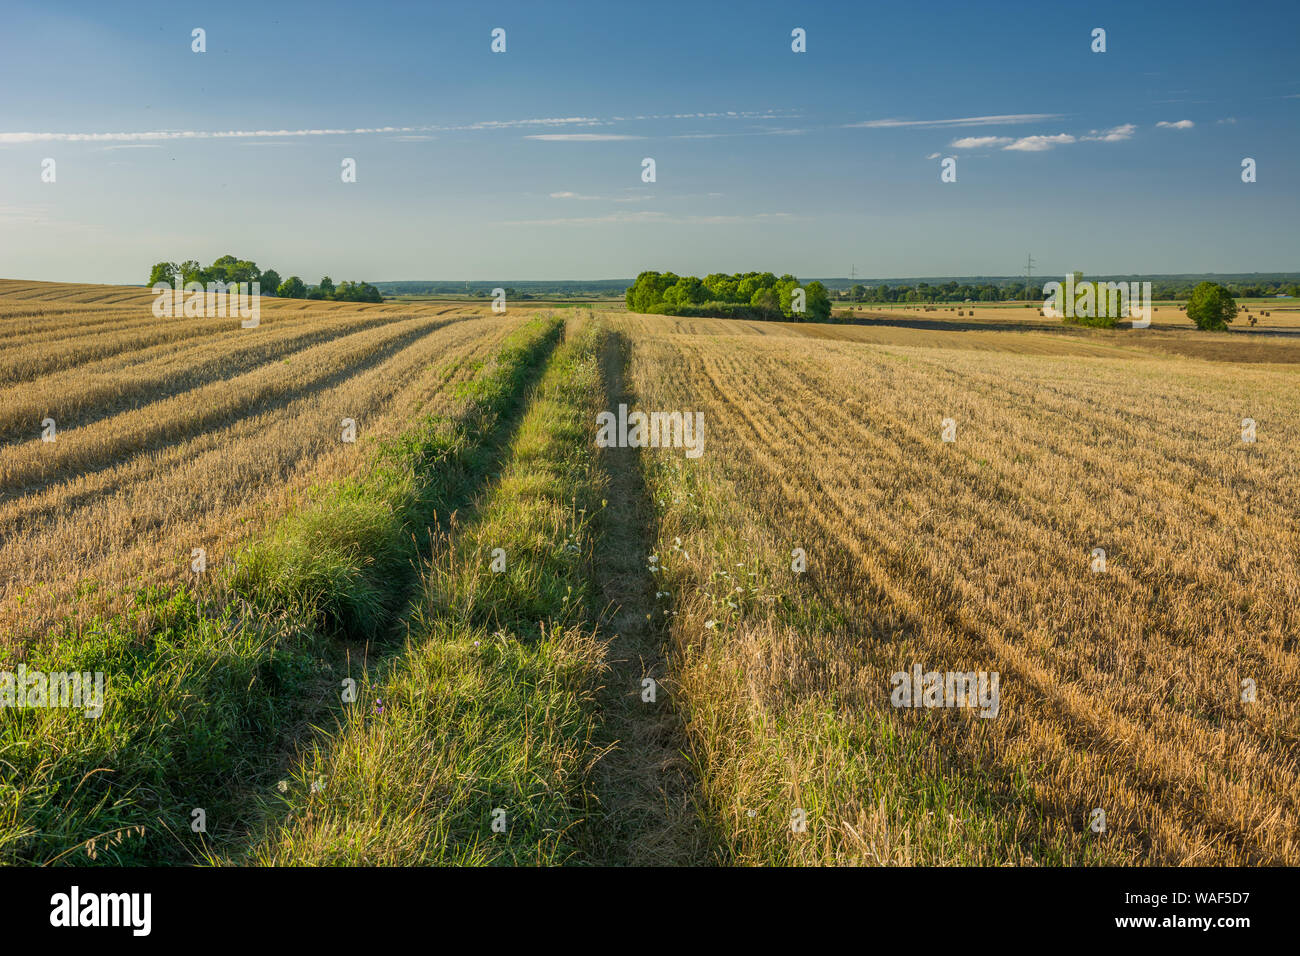 Road overgrown by grass through harvested hilly fields Stock Photo